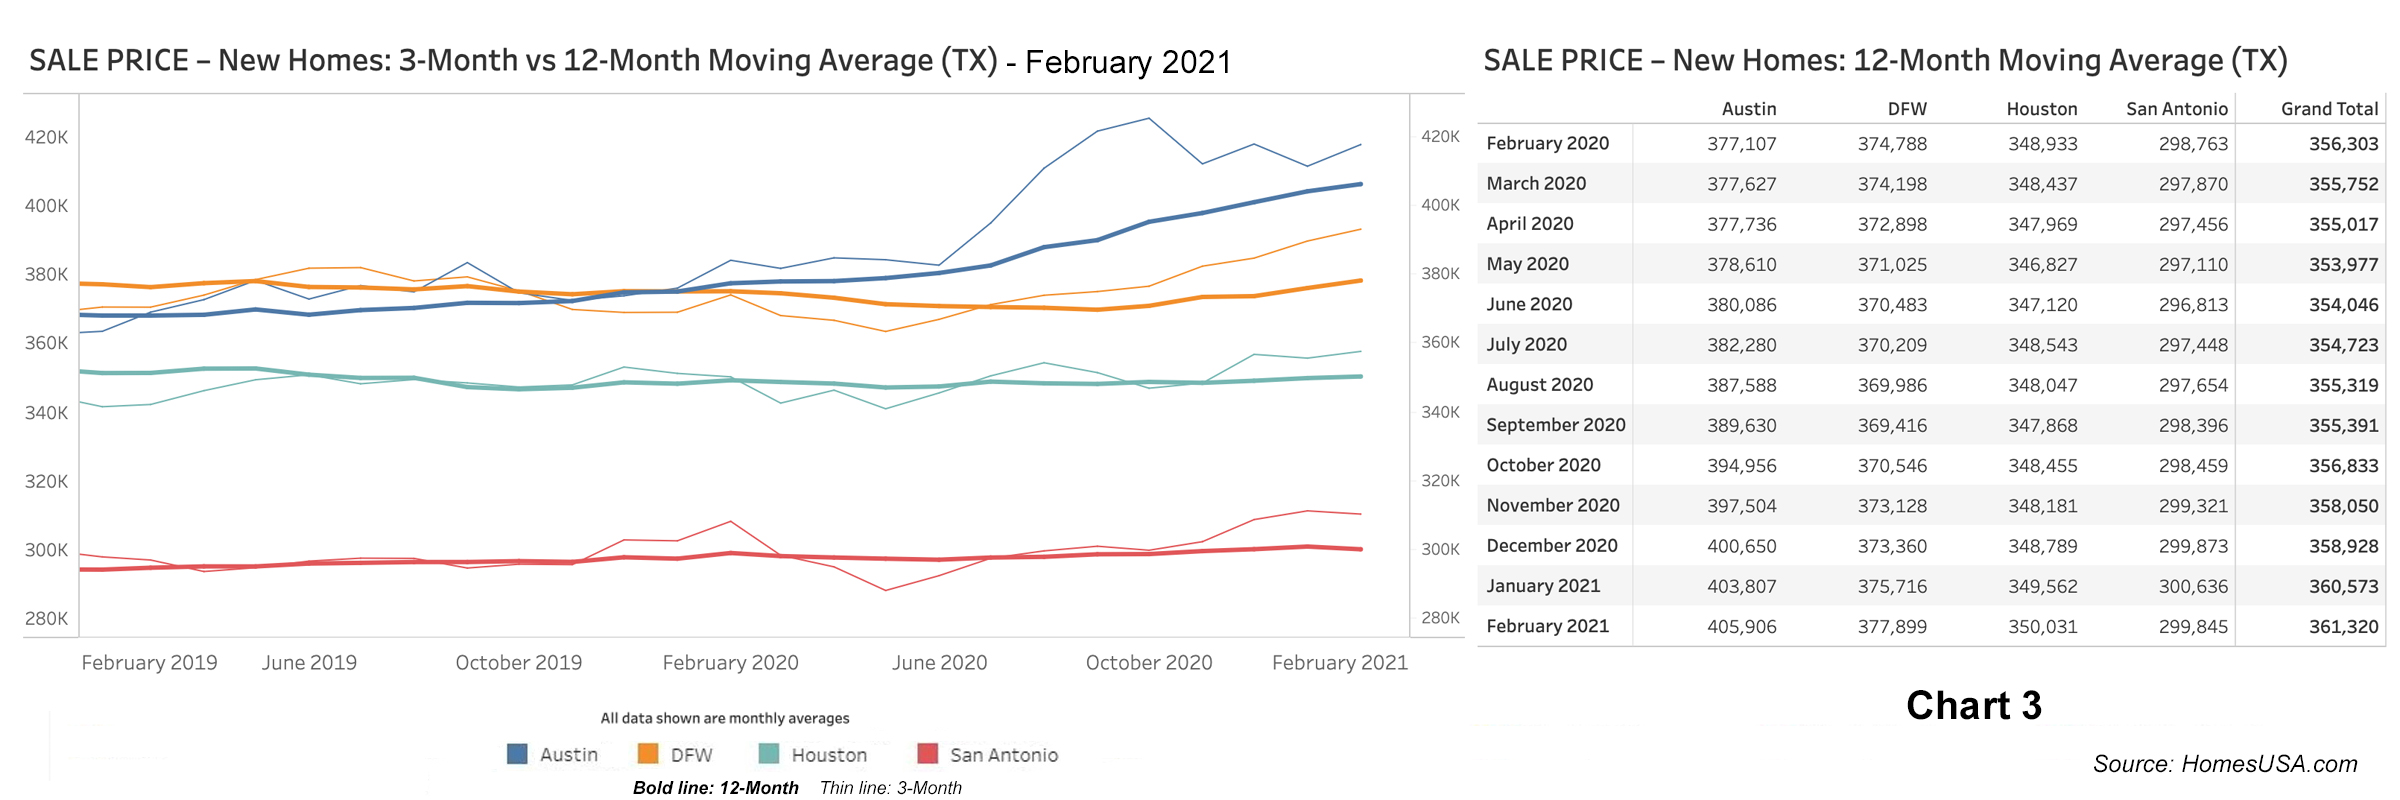 Chart 3: Texas New Home Prices - February 2021